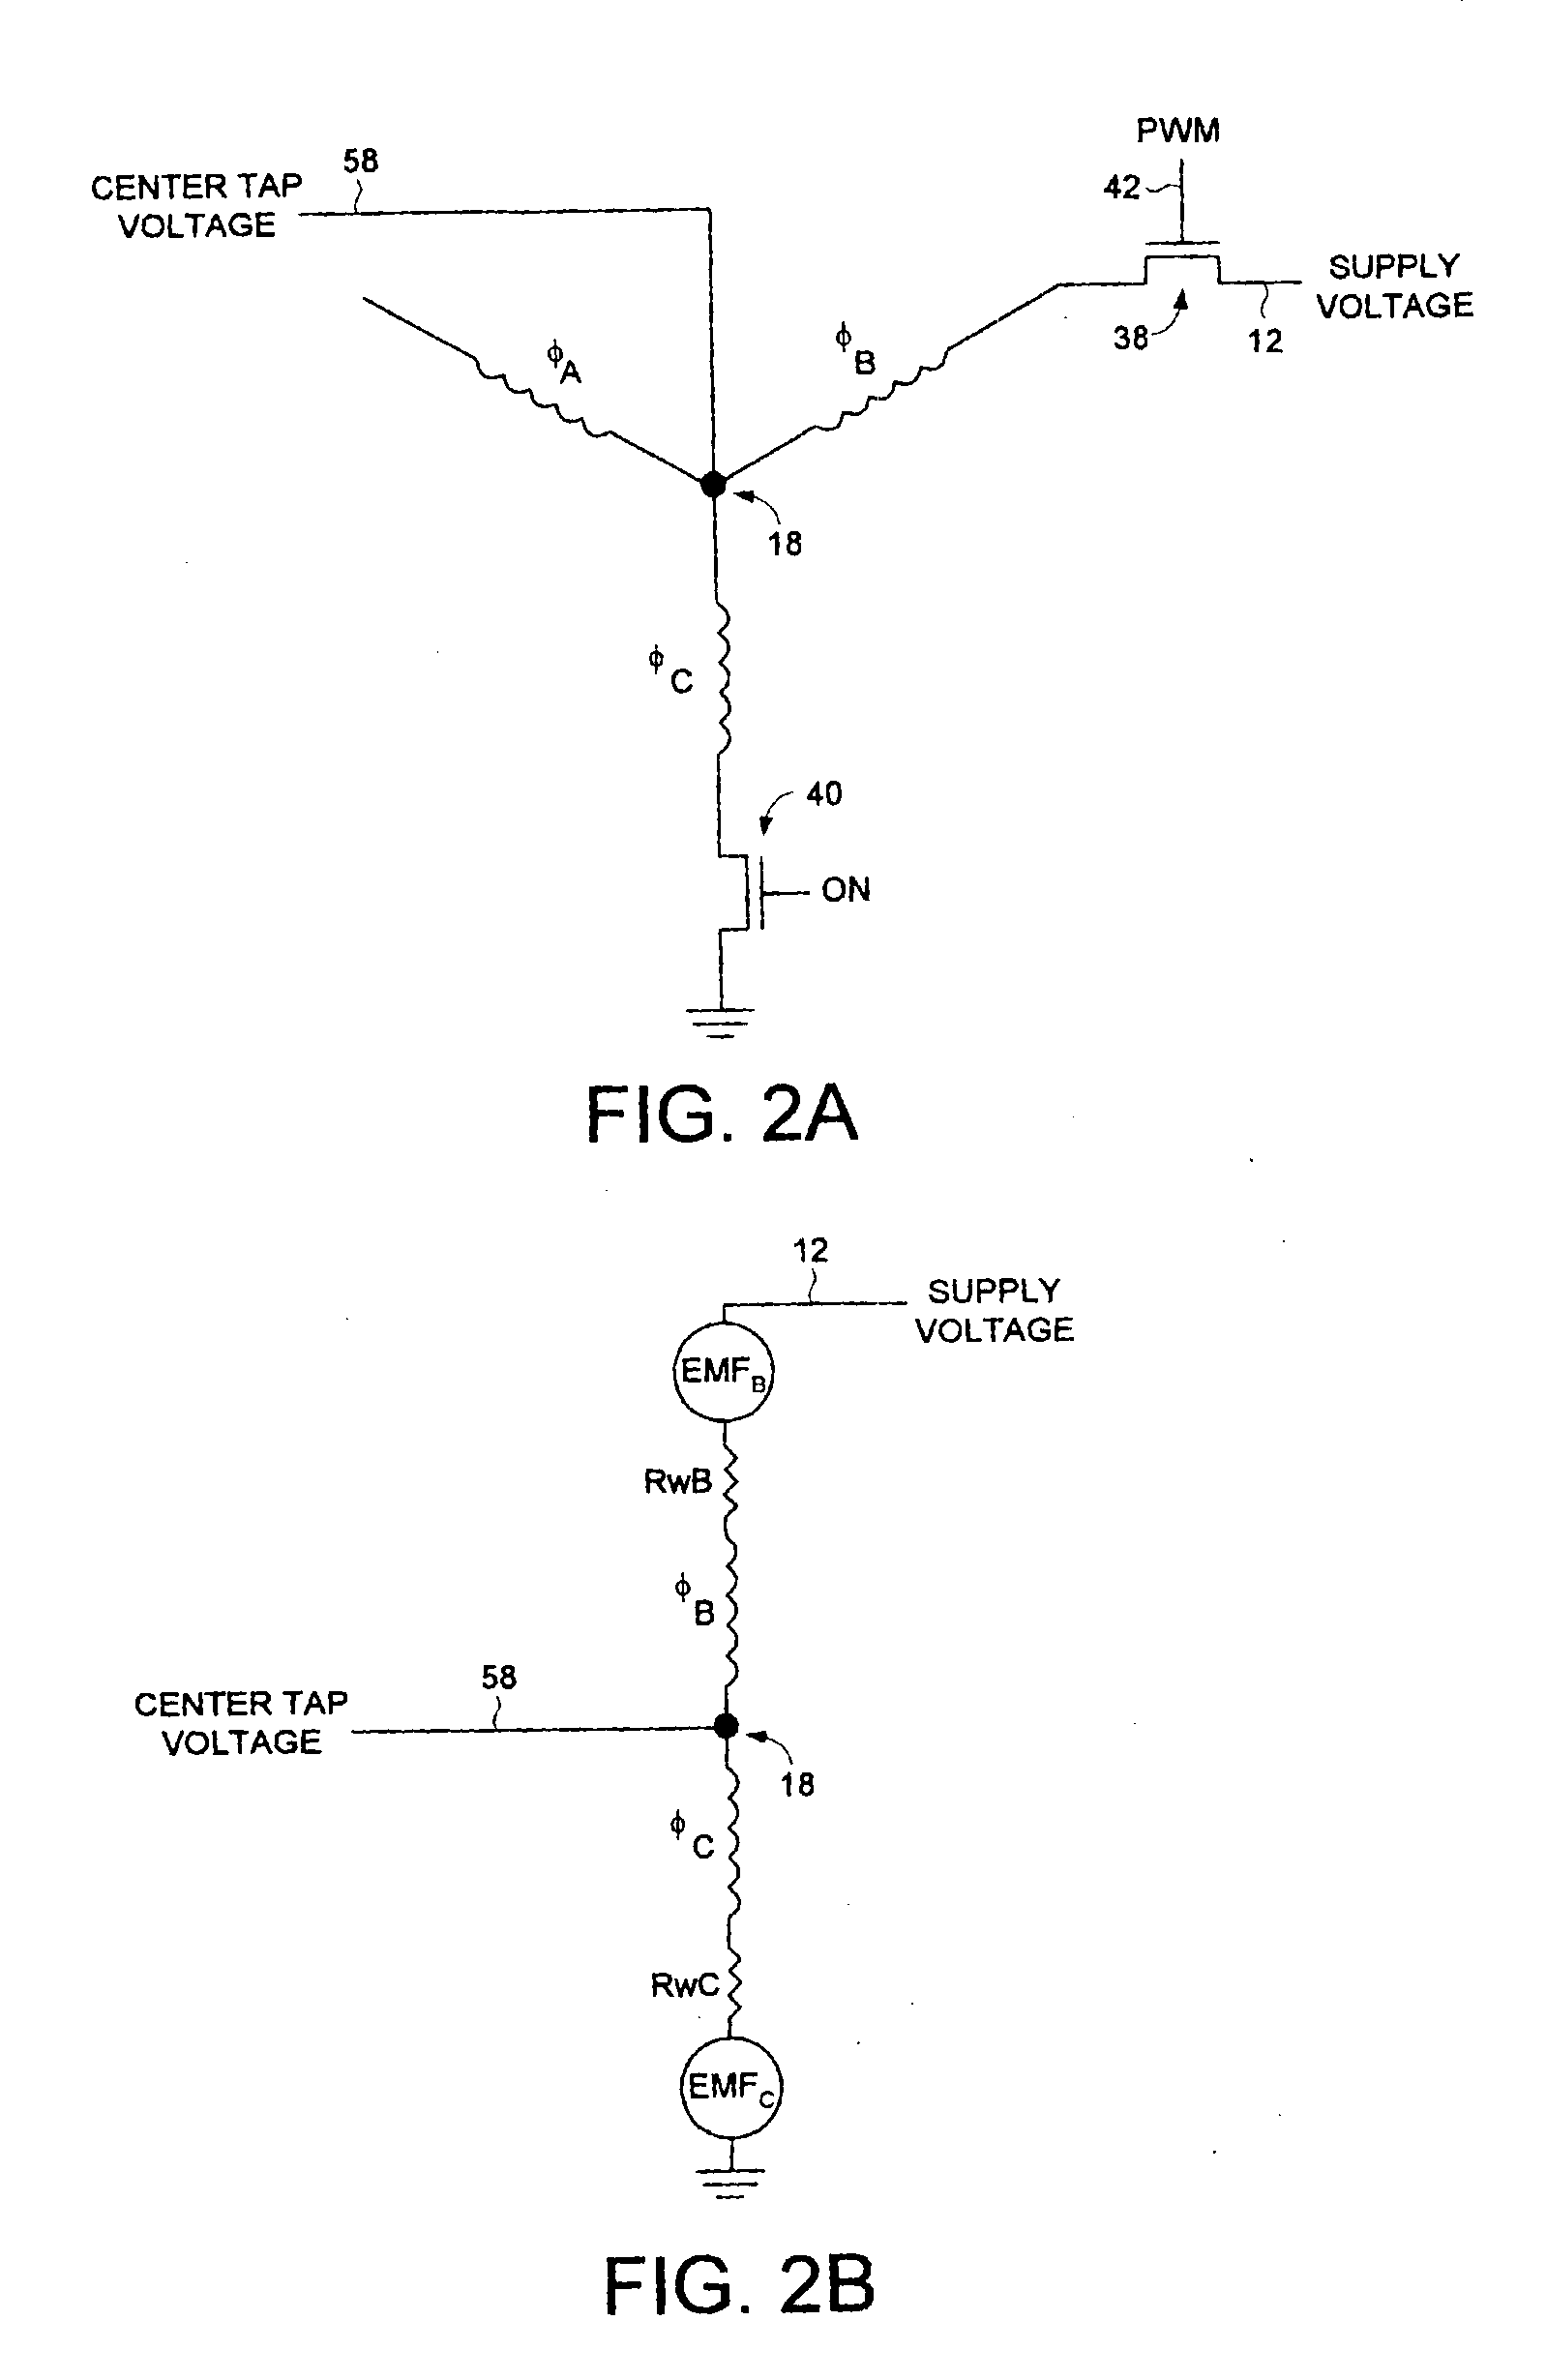 Disk drive comprising control circuitry powered by a secondary voltage supplied by a center tap of a spindle motor during a normal operating mode